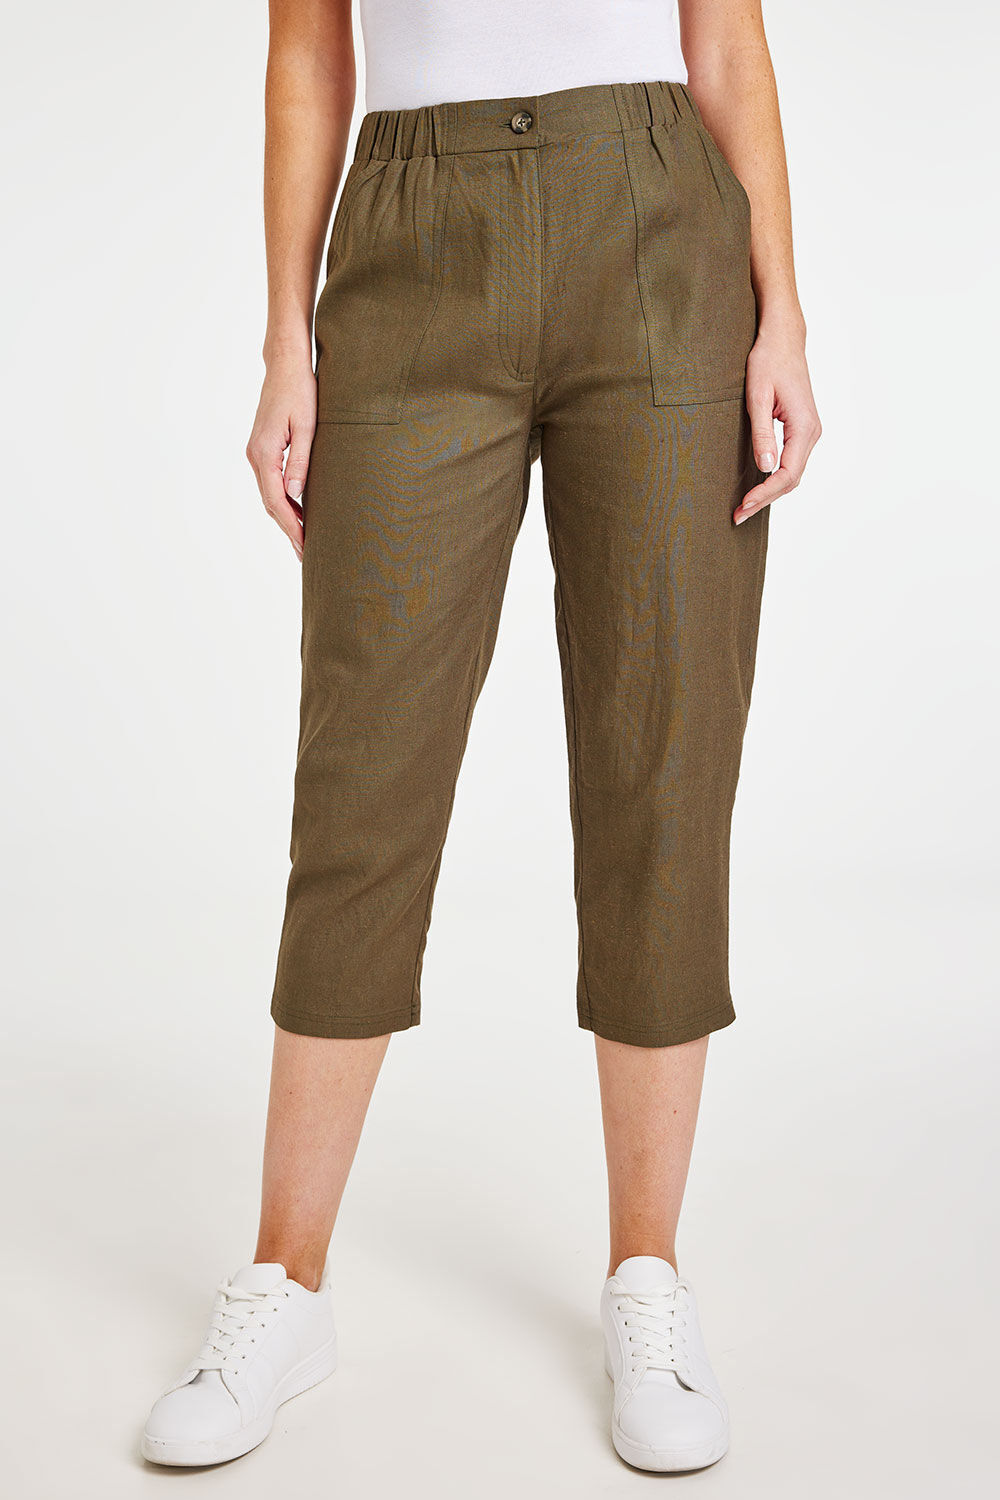 Bonmarche Khaki Tapered Cropped Linen Trousers With Button Detail, Size: 24